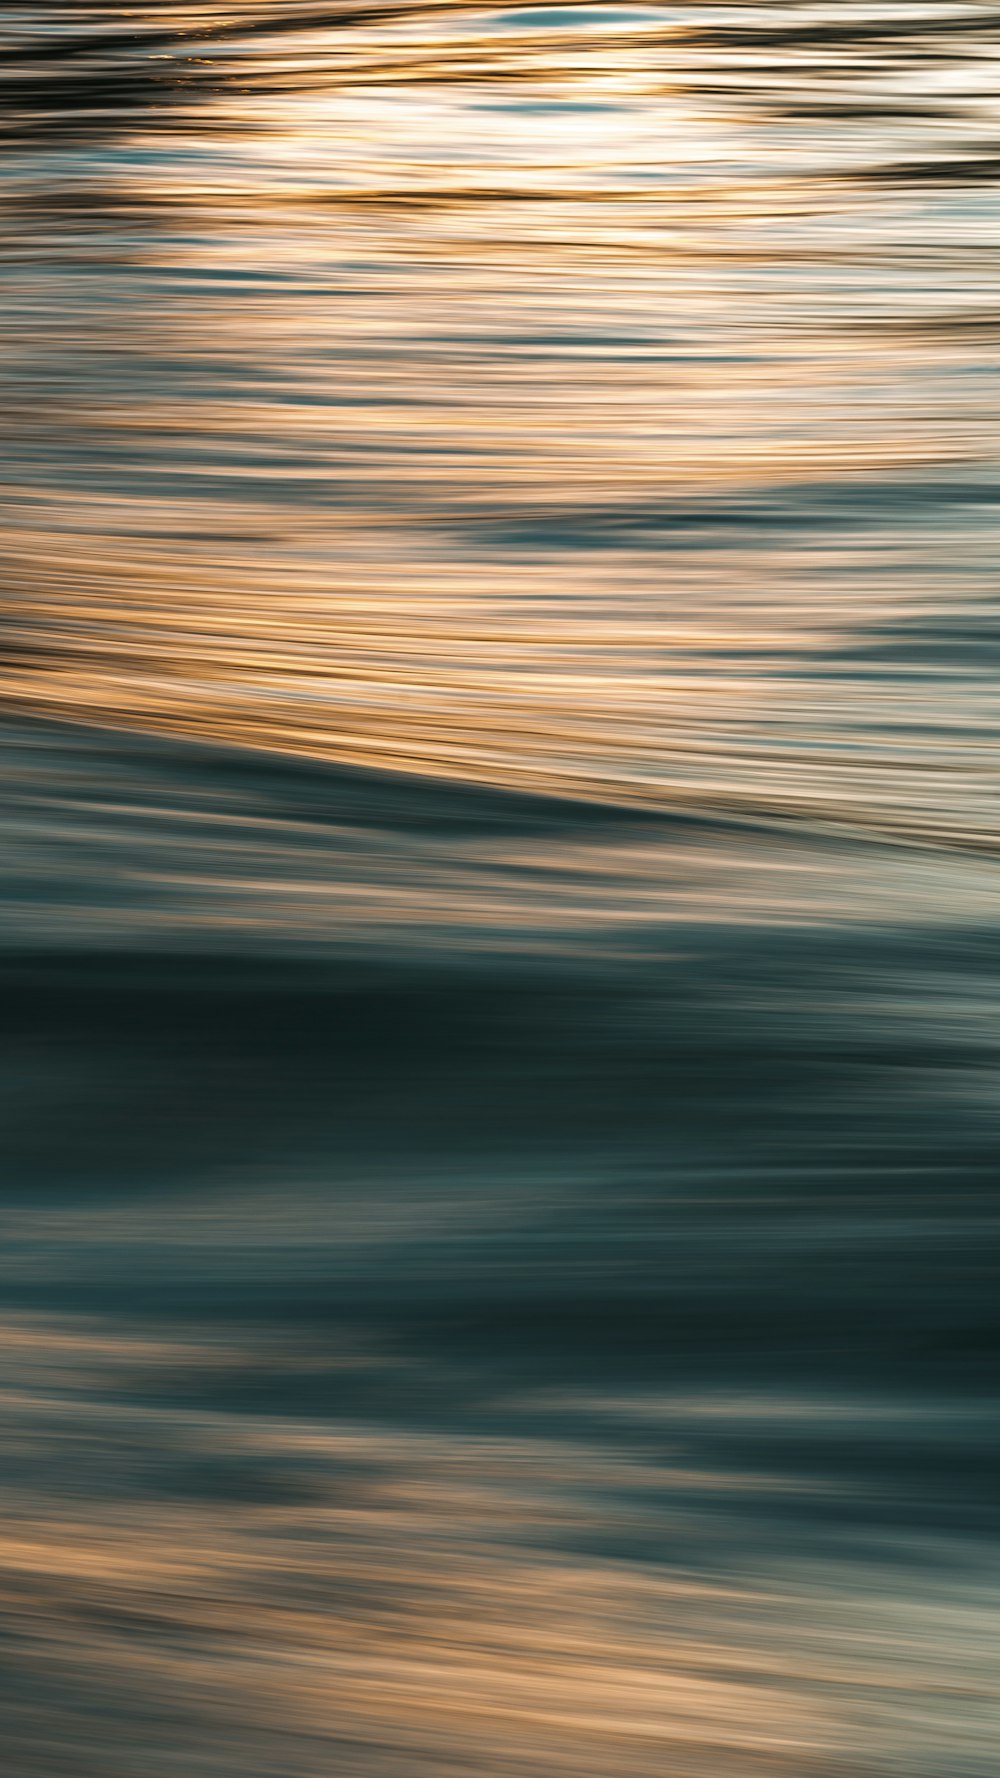 a blurry photo of a surfboard in the water